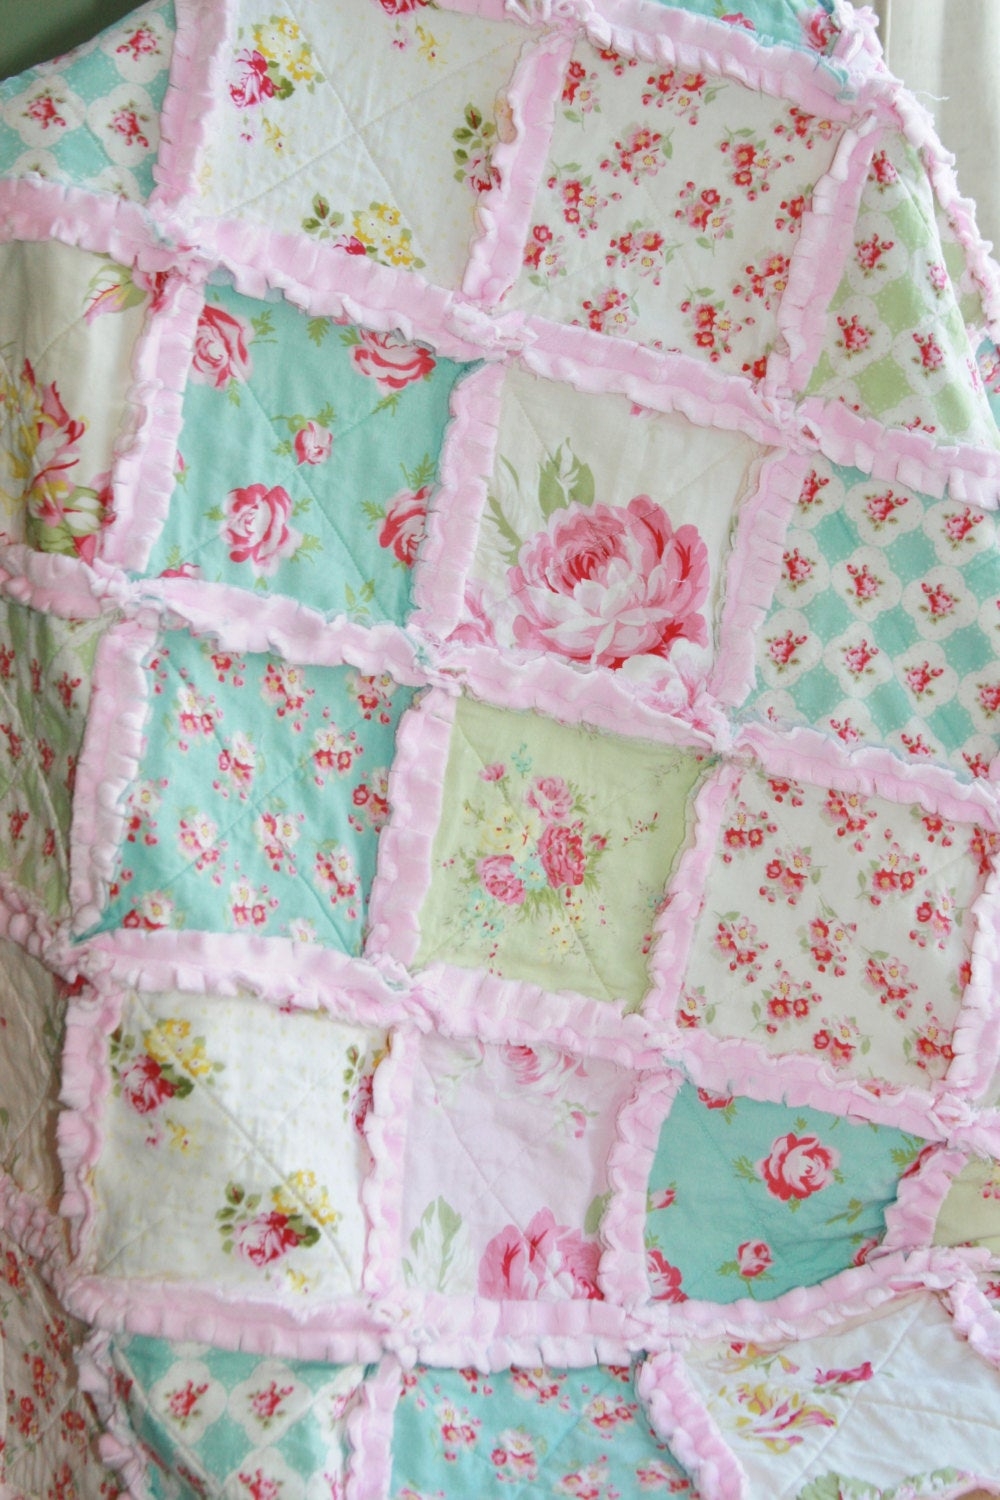 Pink Aqua Turquoise Roses Shabby Chic Baby Quilt Baby Girl Crib Bedding Blue Red Baby Blanket Floral Crib Rag Quilt